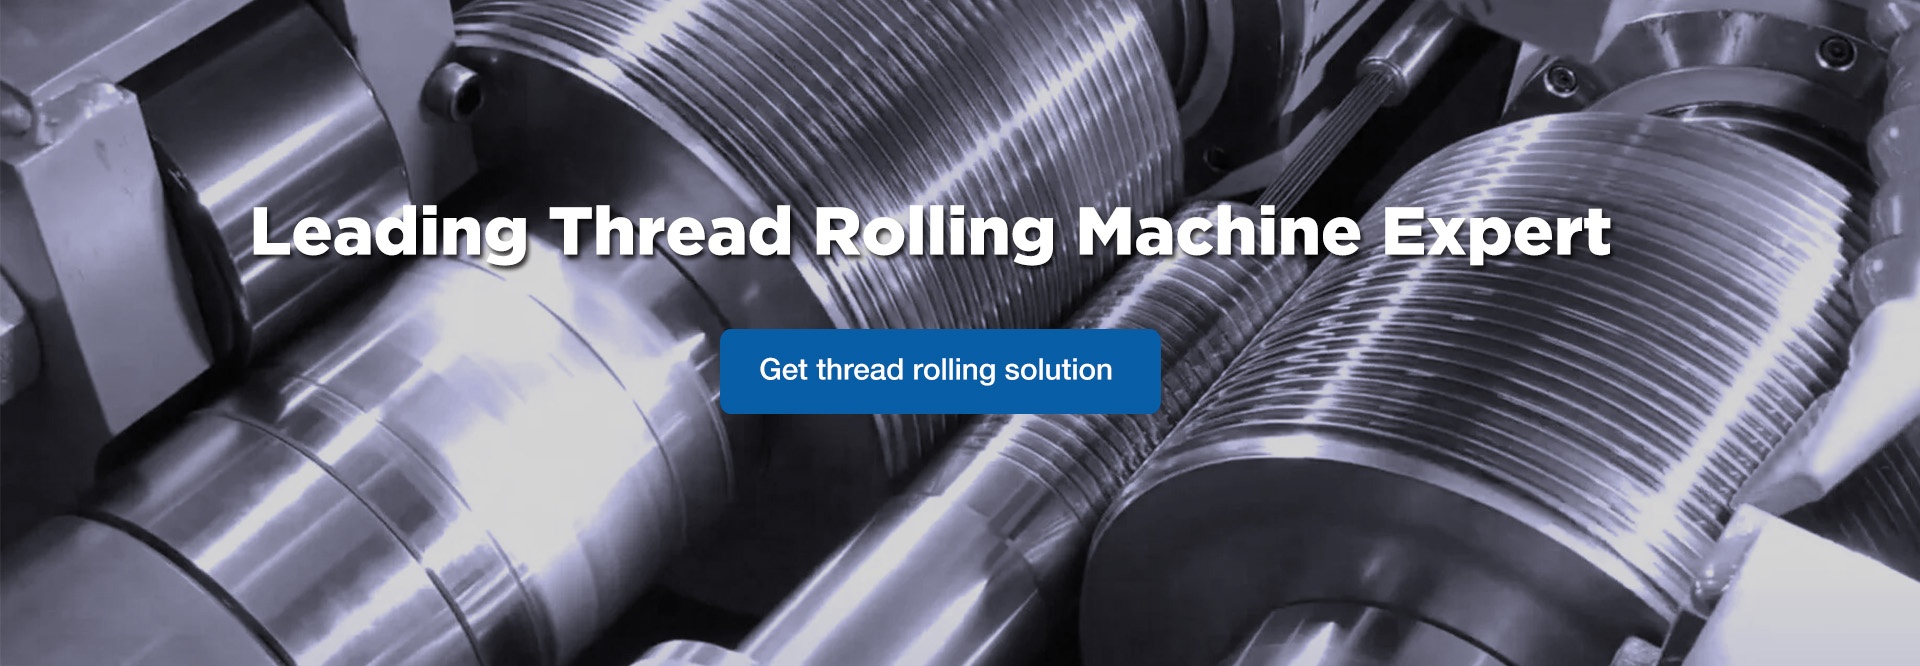 Get thread rolling solution